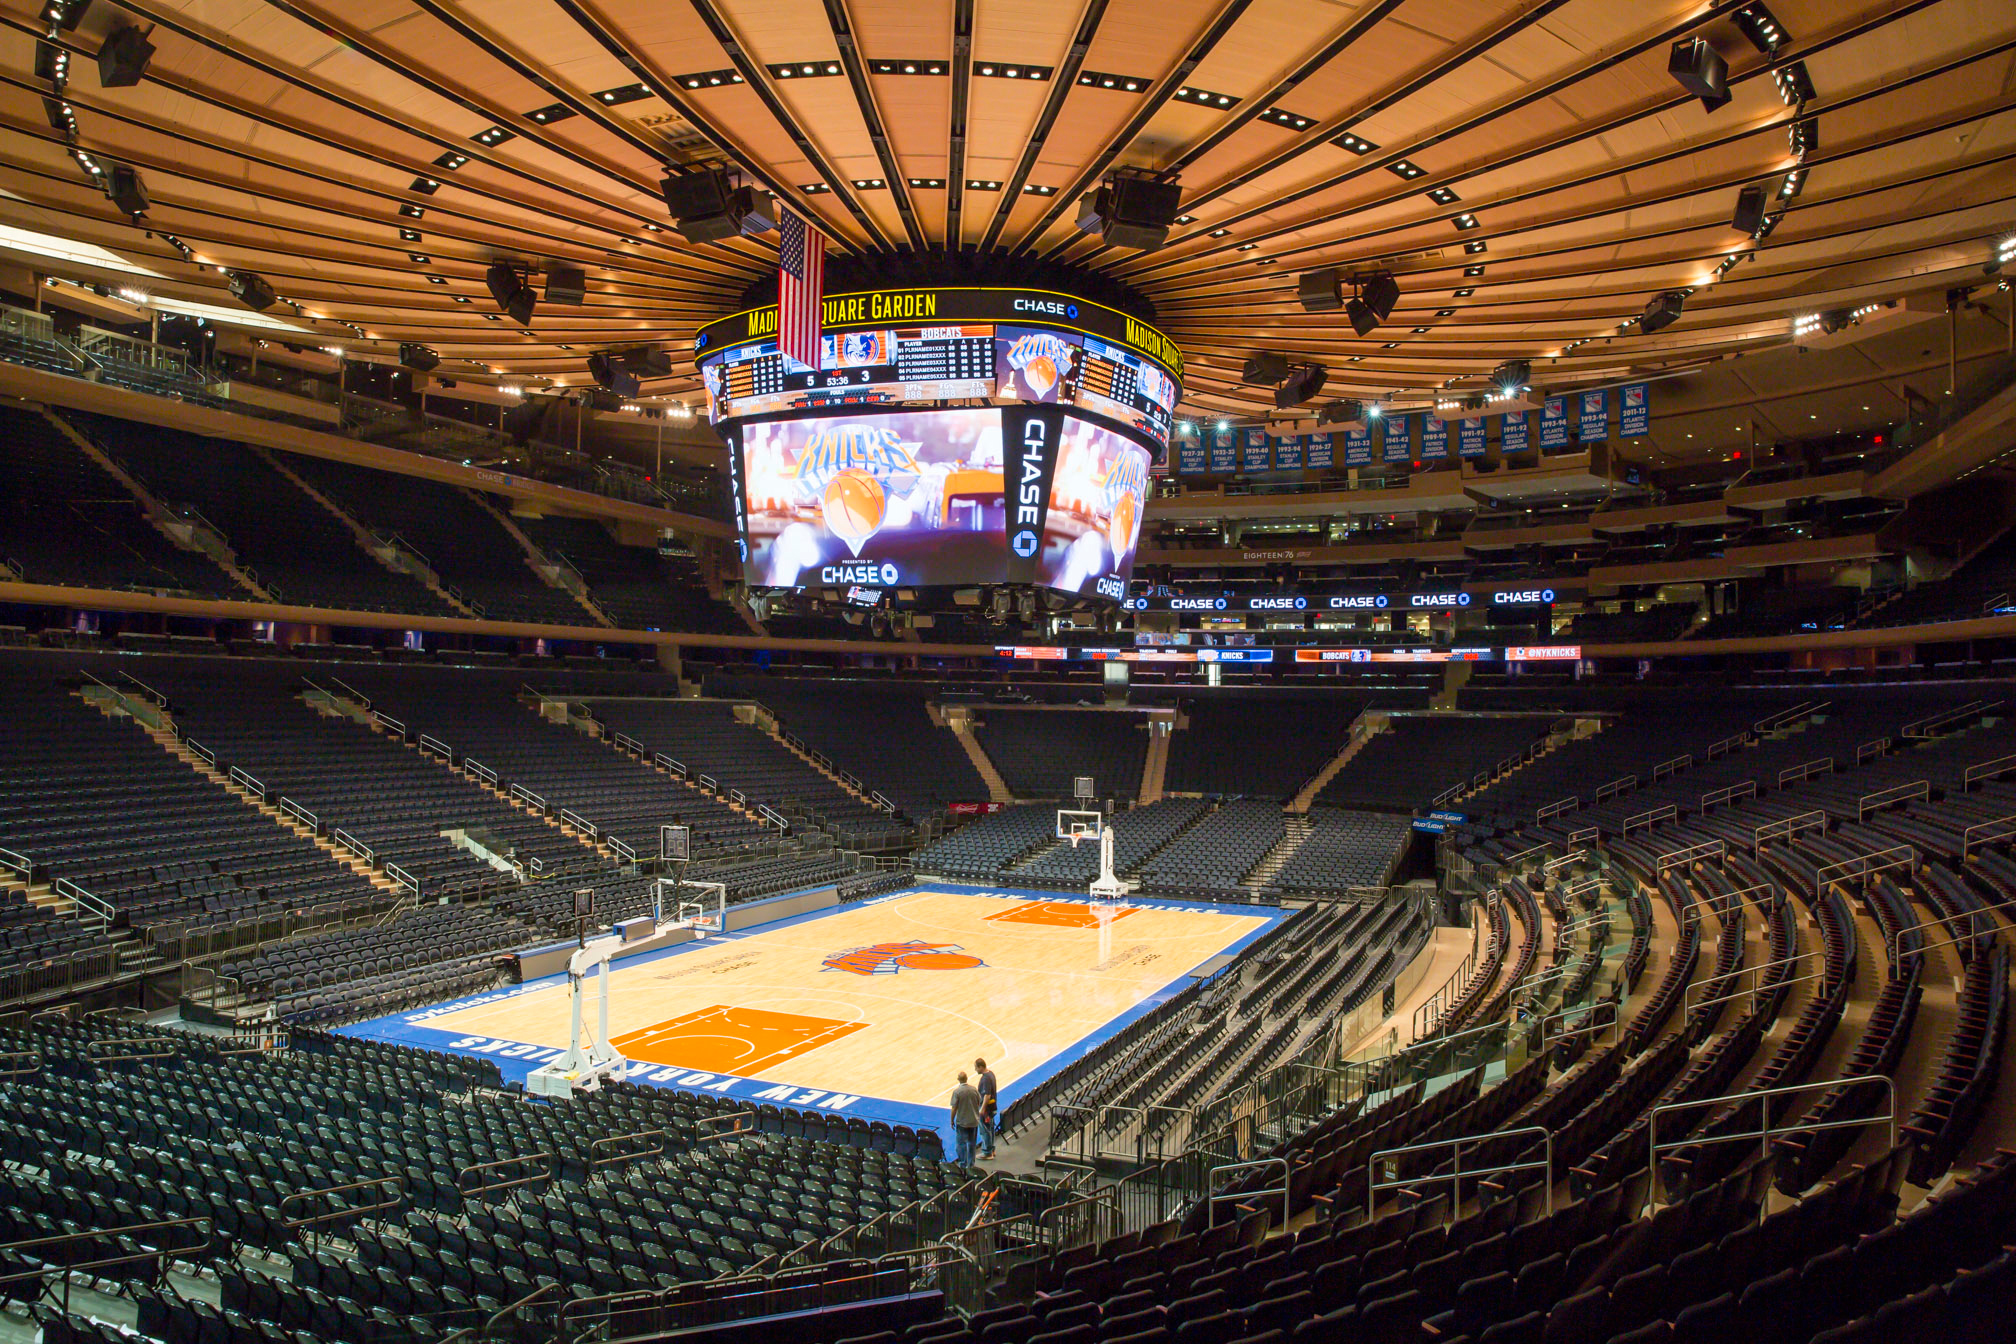 Check out Madison Square Garden in New York (PHOTOS) BOOMSbeat